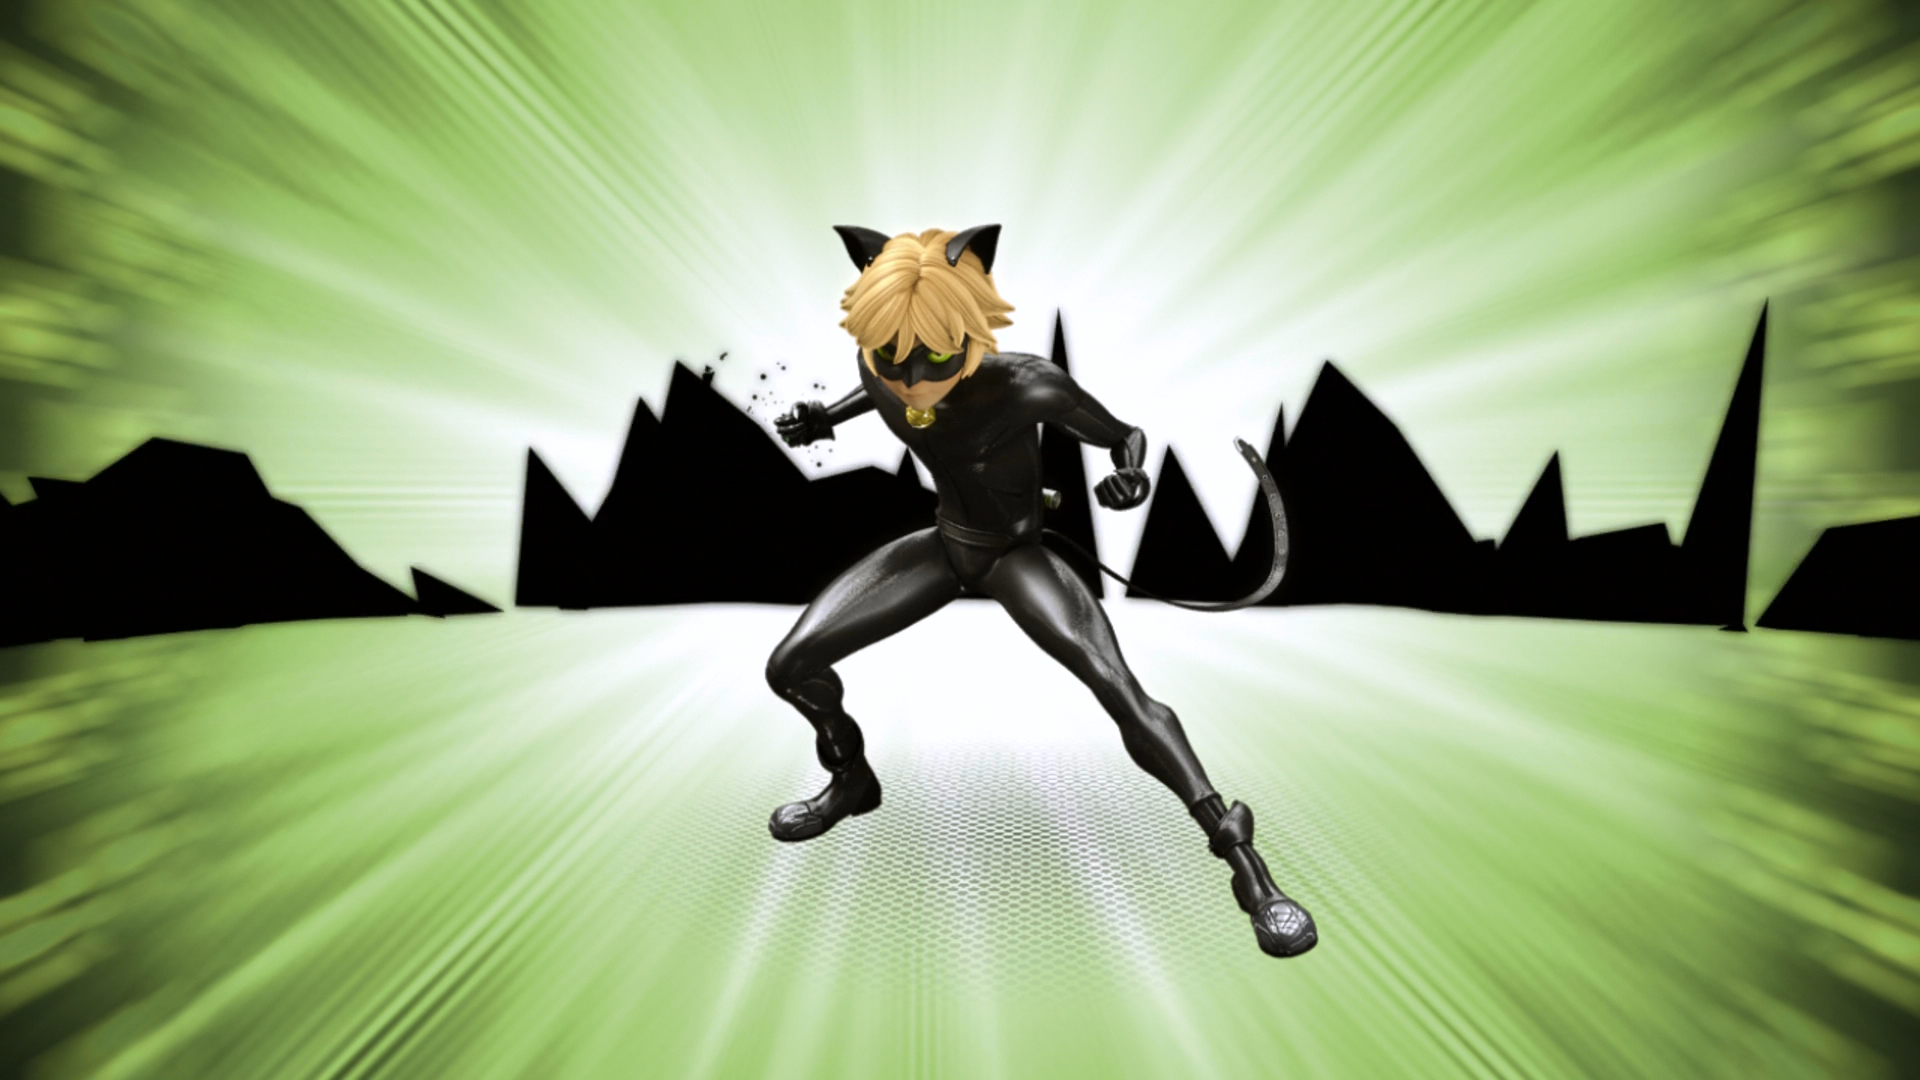 PC / Computer - Miraculous: Rise of the Sphinx - Cat Noir / Chat